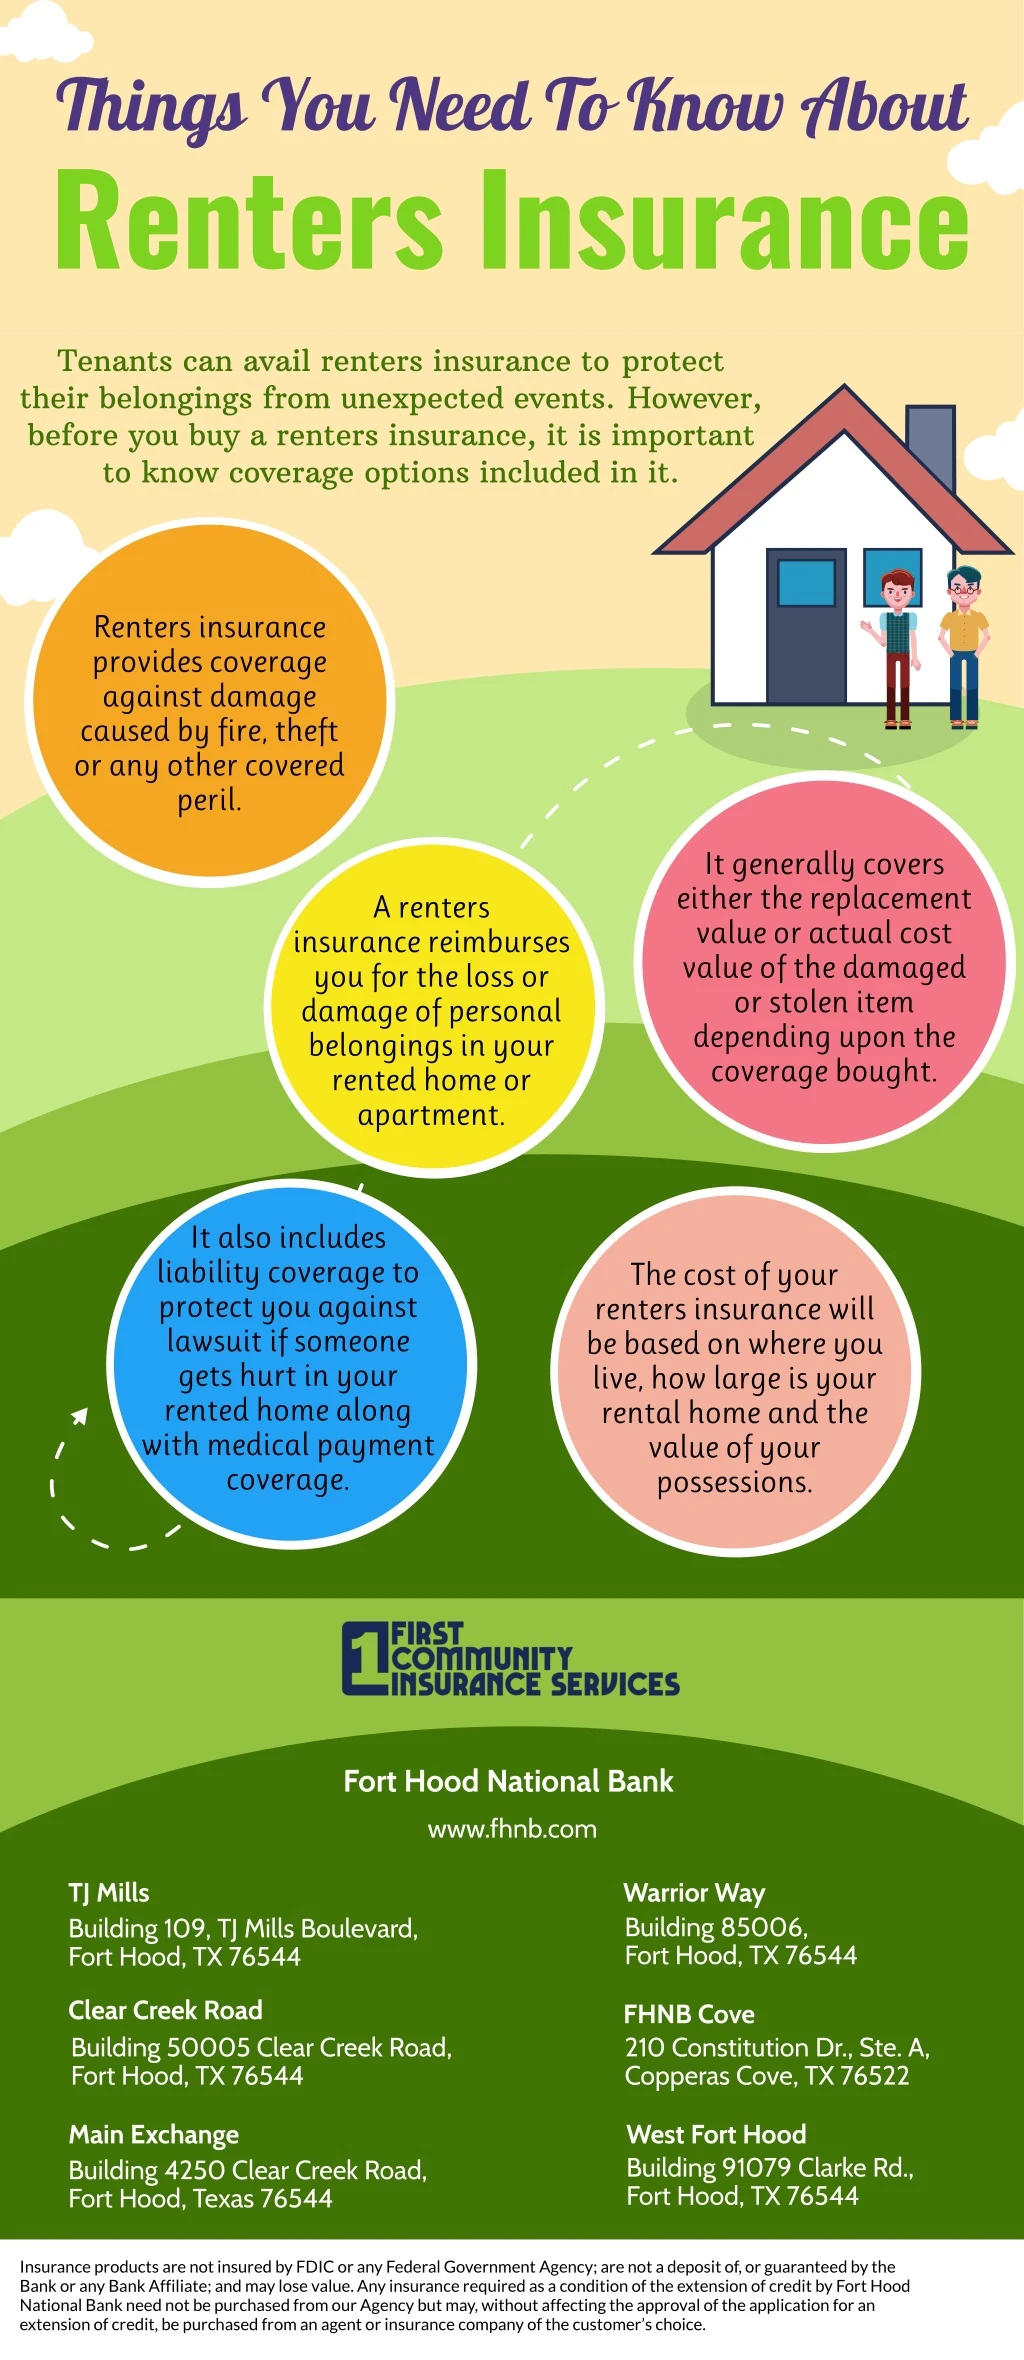 things you need to know about renters insurance